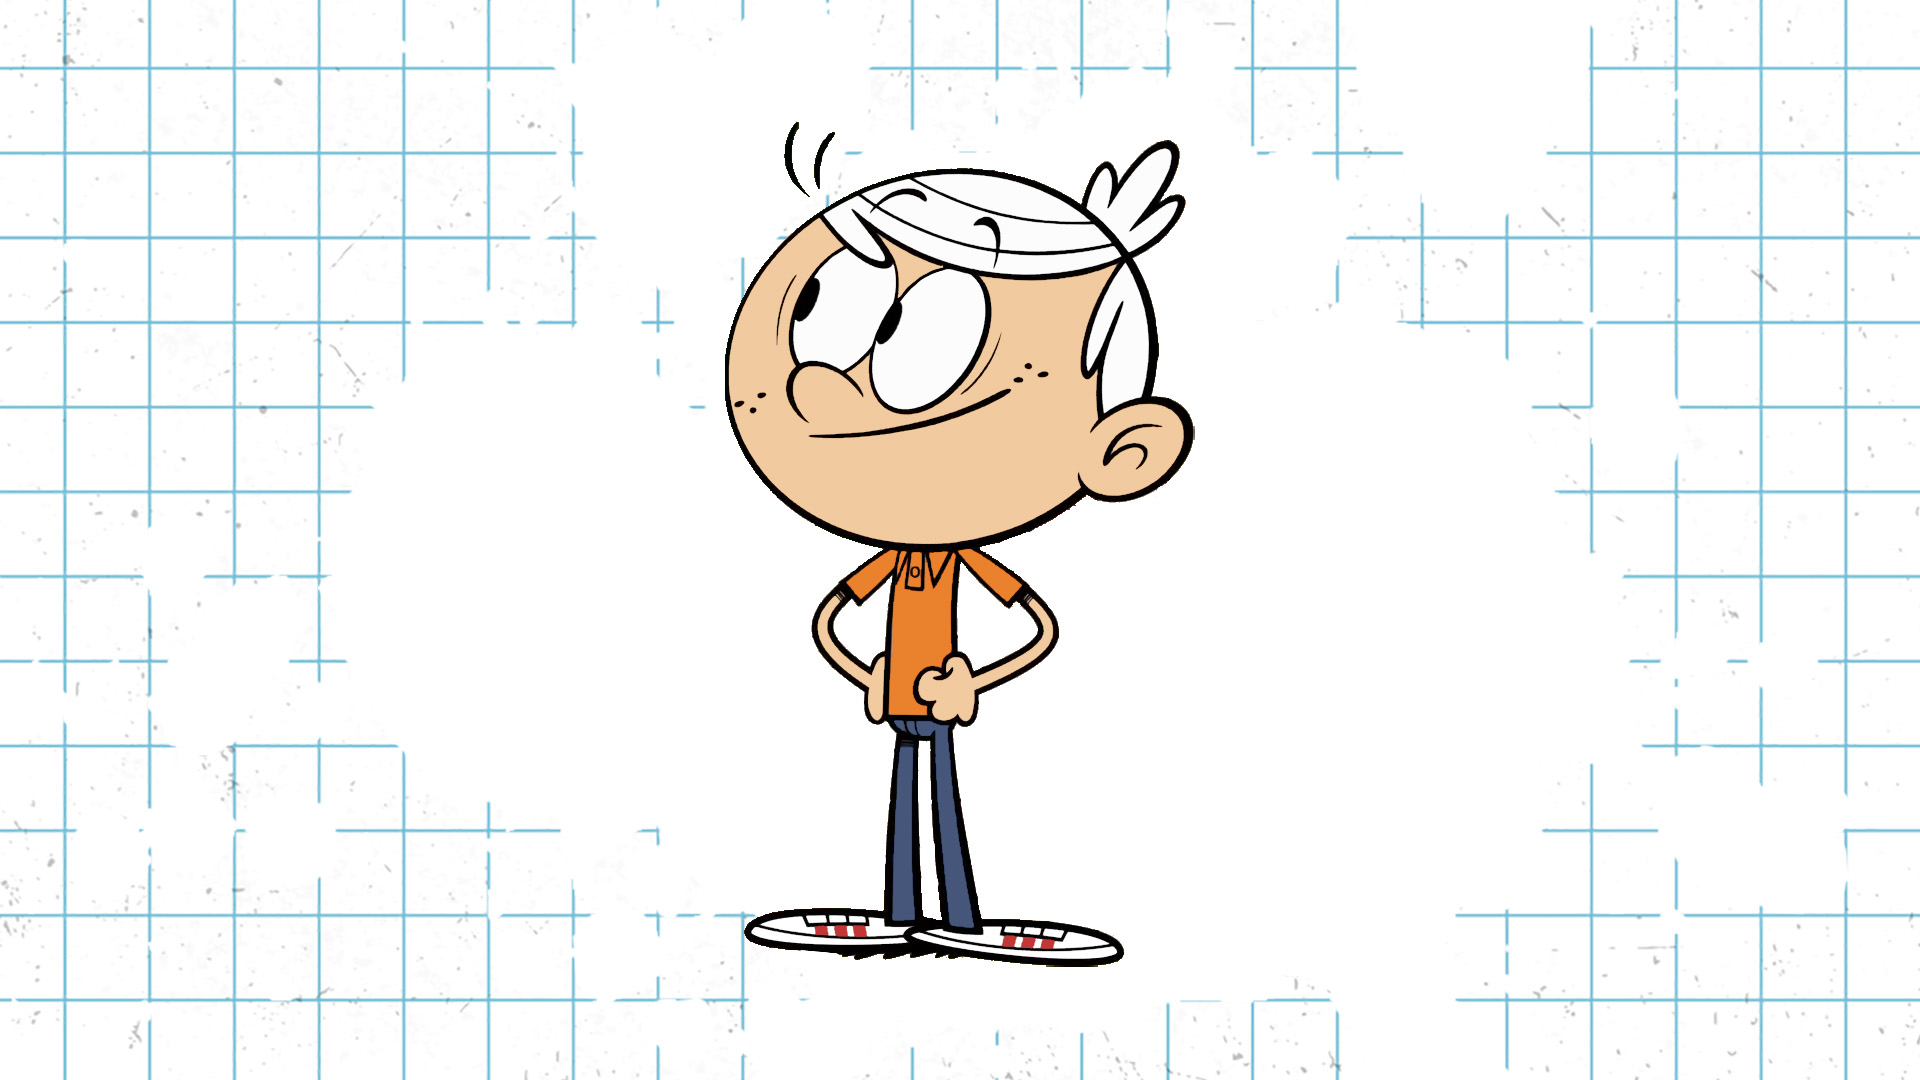 A Loud House character with white hair